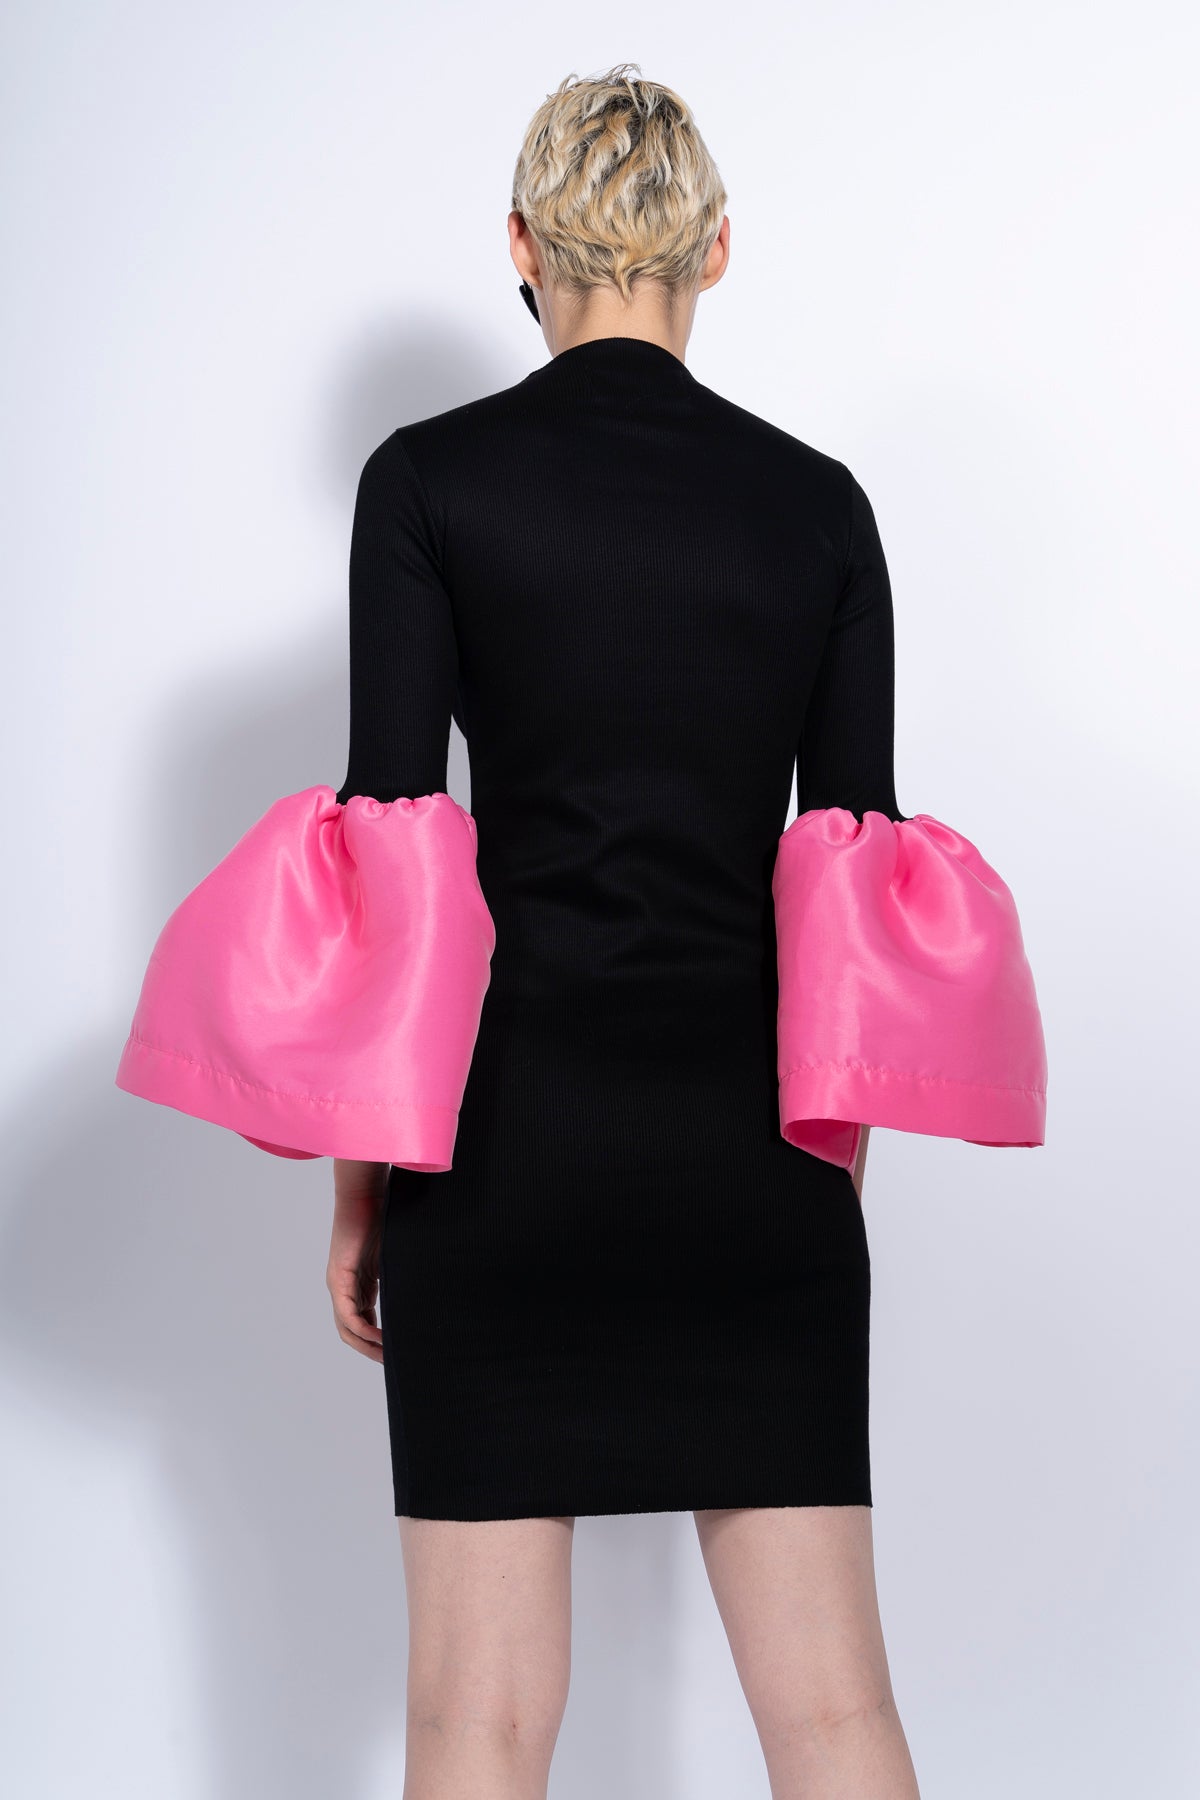 BLACK AND PINK RIB DRESS WITH PUFF SLEEVES marques almeida